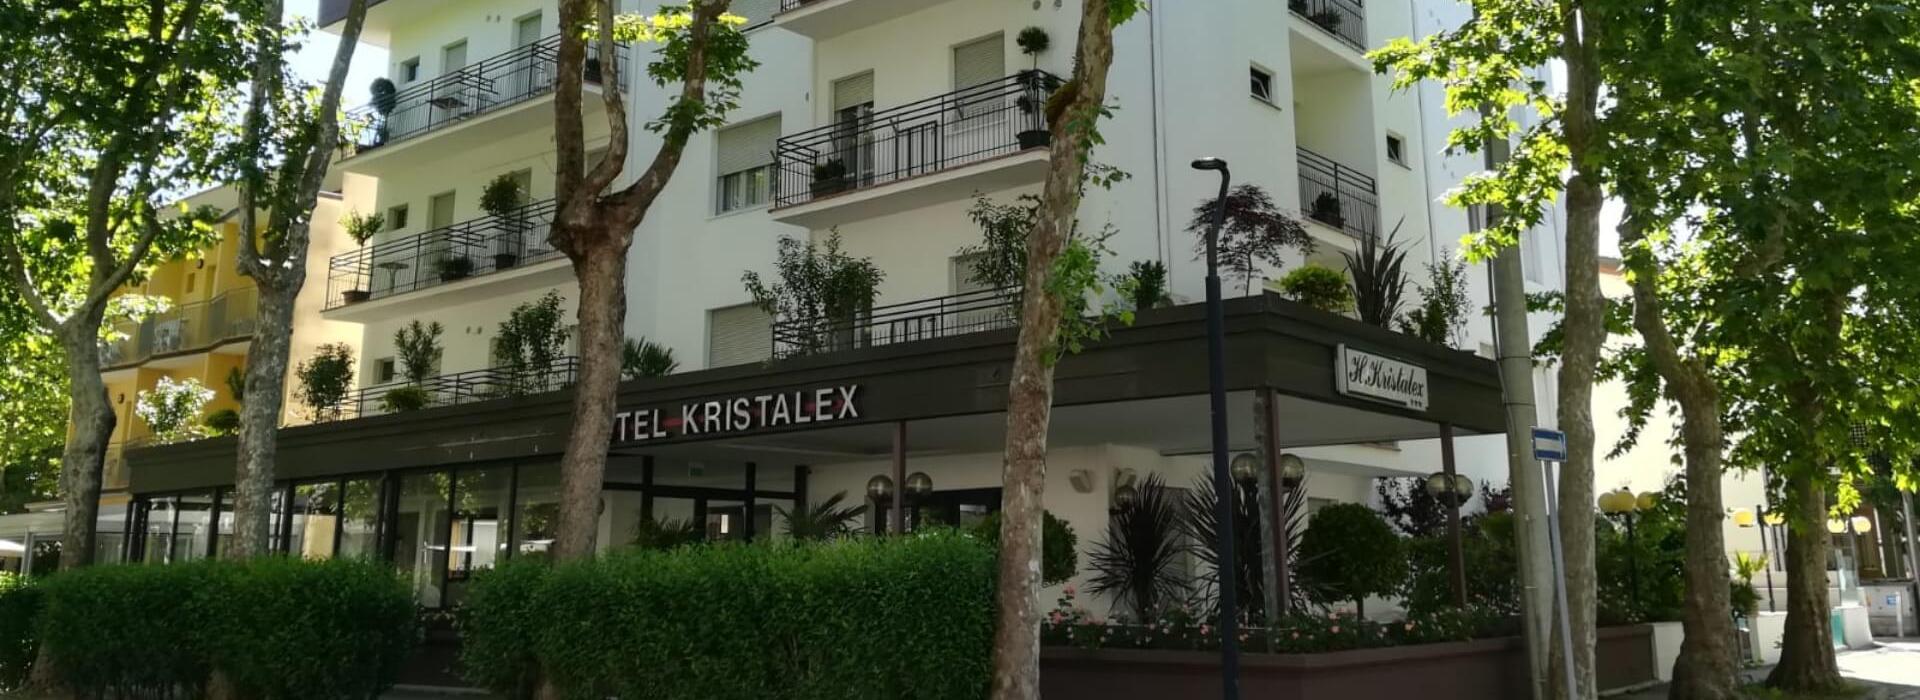 hotelkristalex en september-special-relax-by-the-sea-in-a-3-star-hotel-in-cesenatico 015